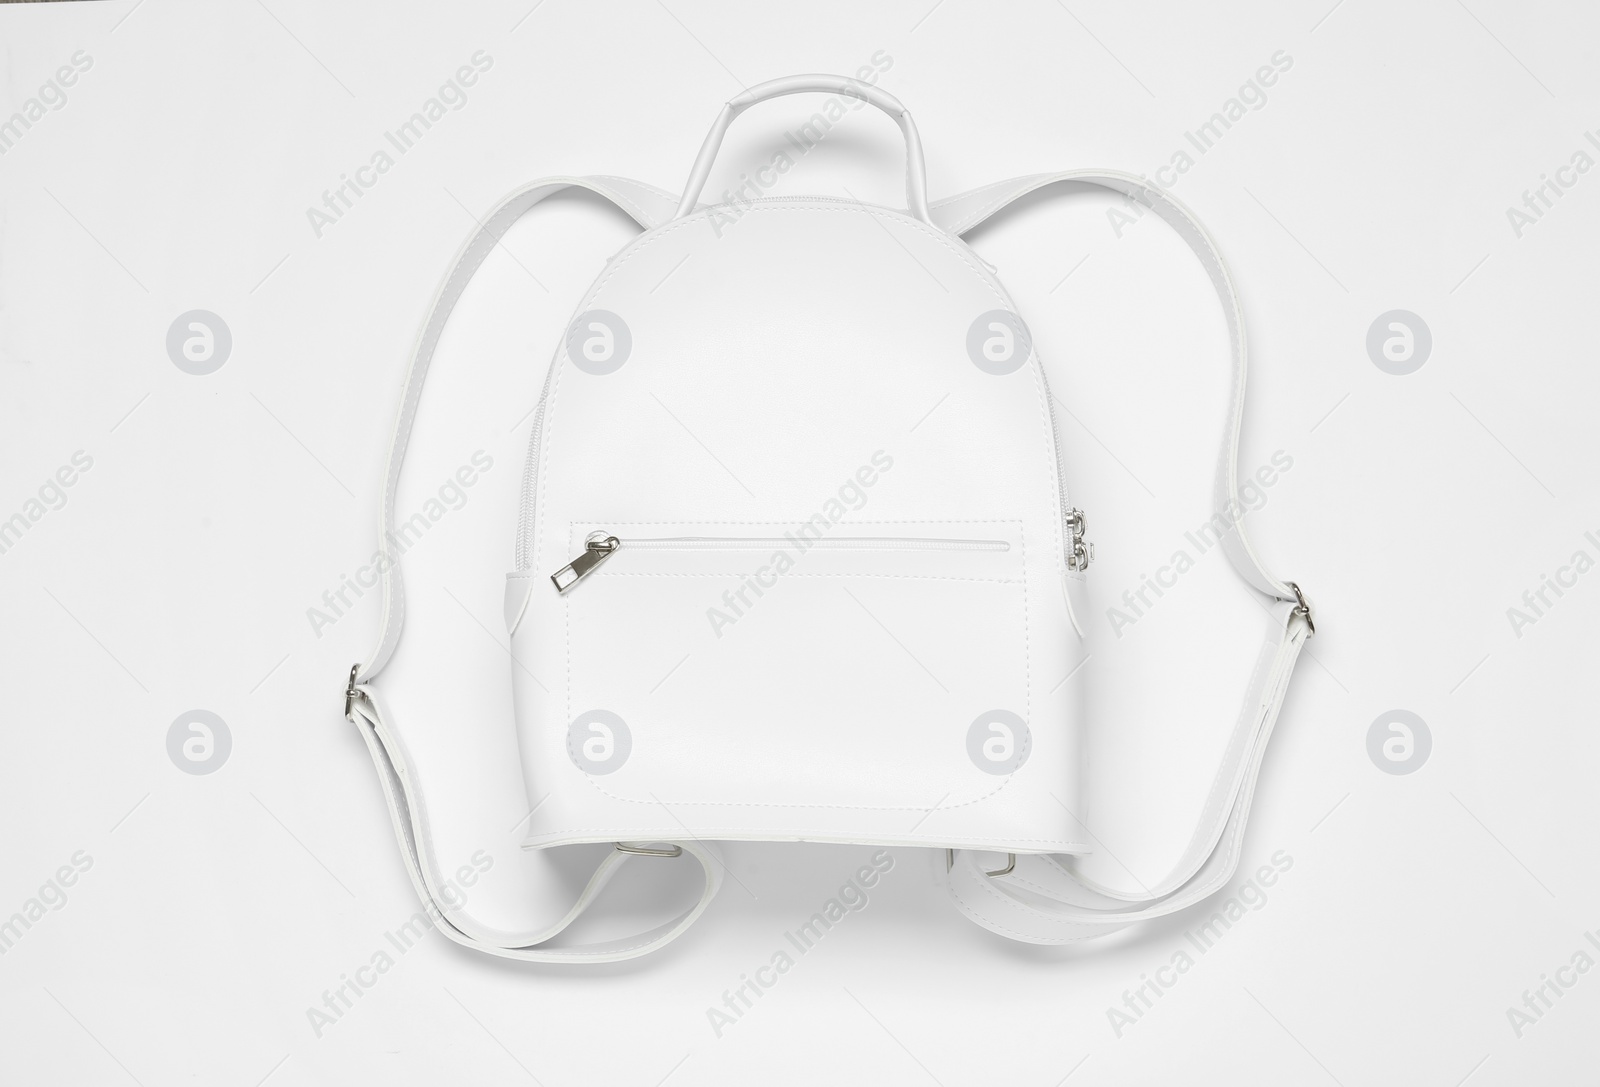 Photo of Stylish urban backpack on white background, top view